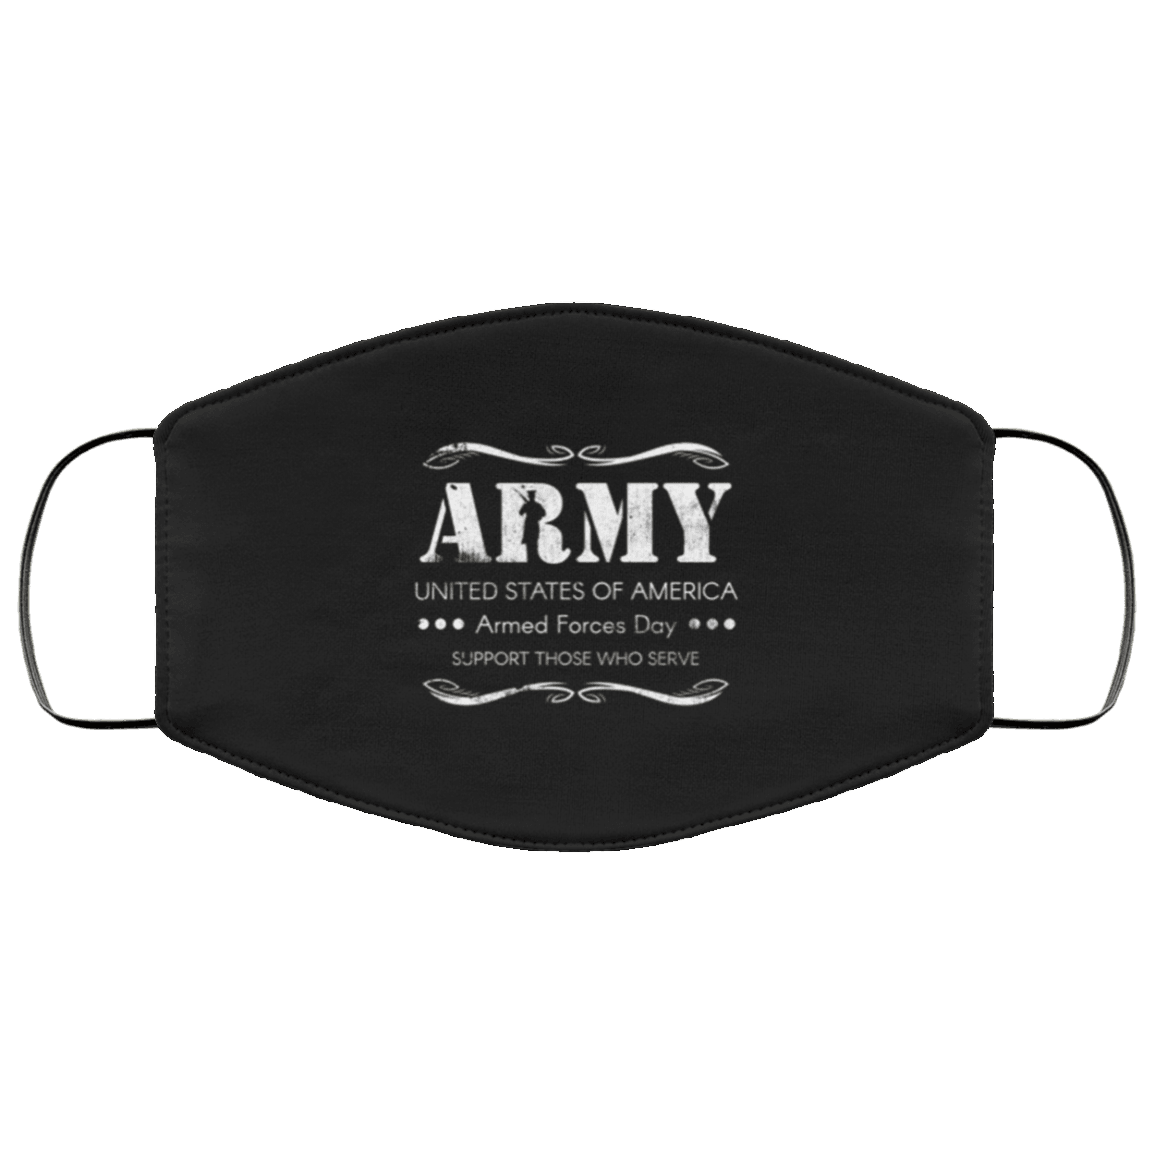 Designs by MyUtopia Shout Out:Army Armed Forces Day Adult Fabric Face Mask with Elastic Ear Loops,3 Layer Fabric Face Mask / Black / Adult,Fabric Face Mask